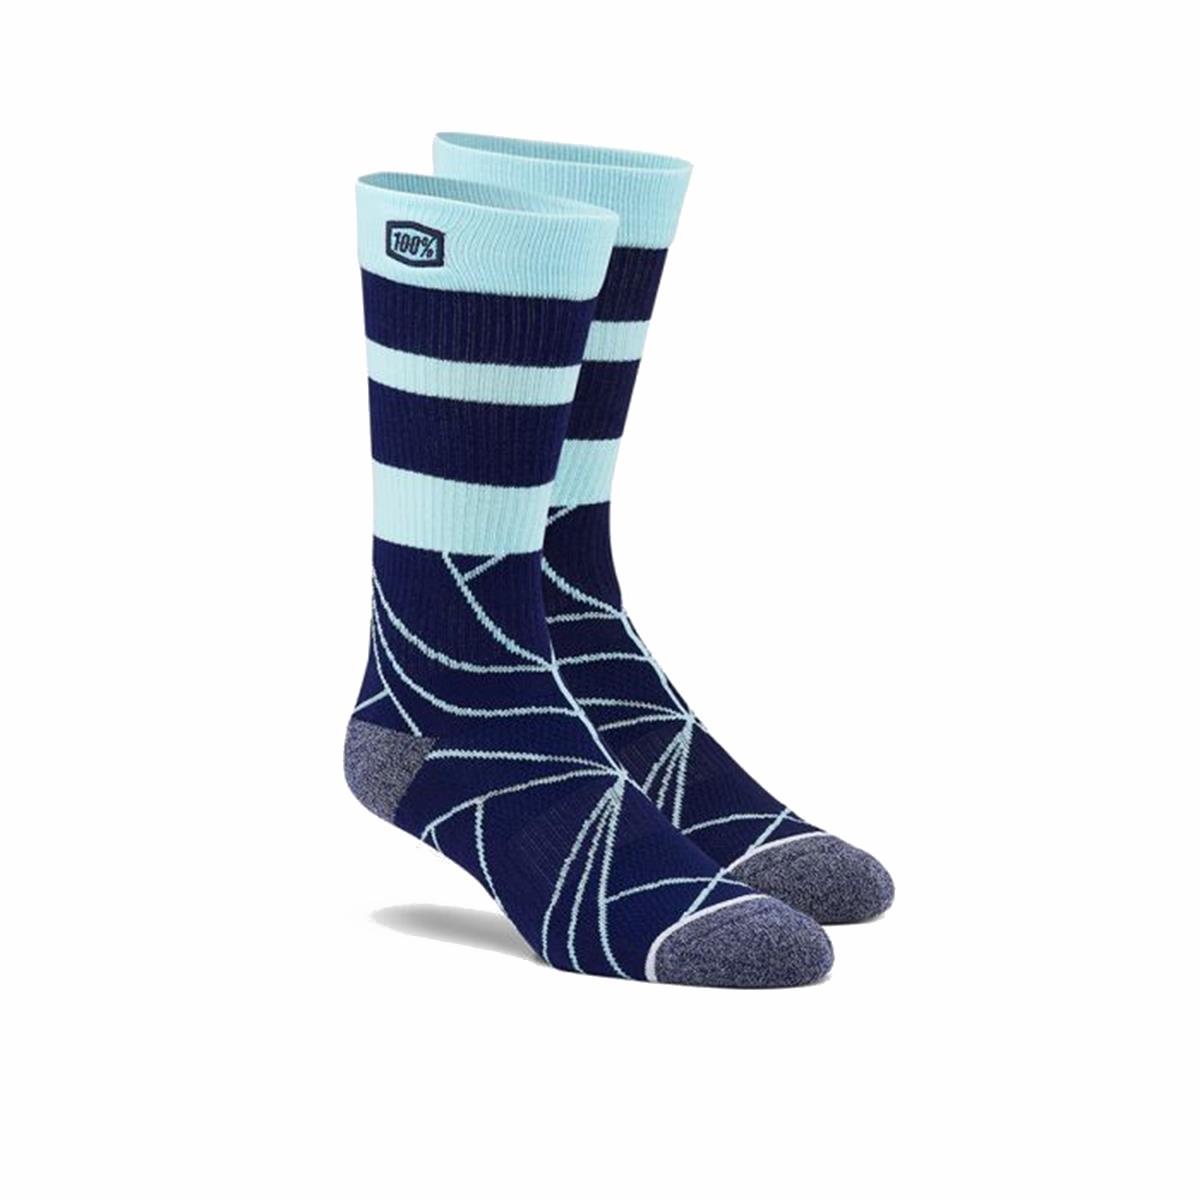 100% Chaussettes Fracture Navy